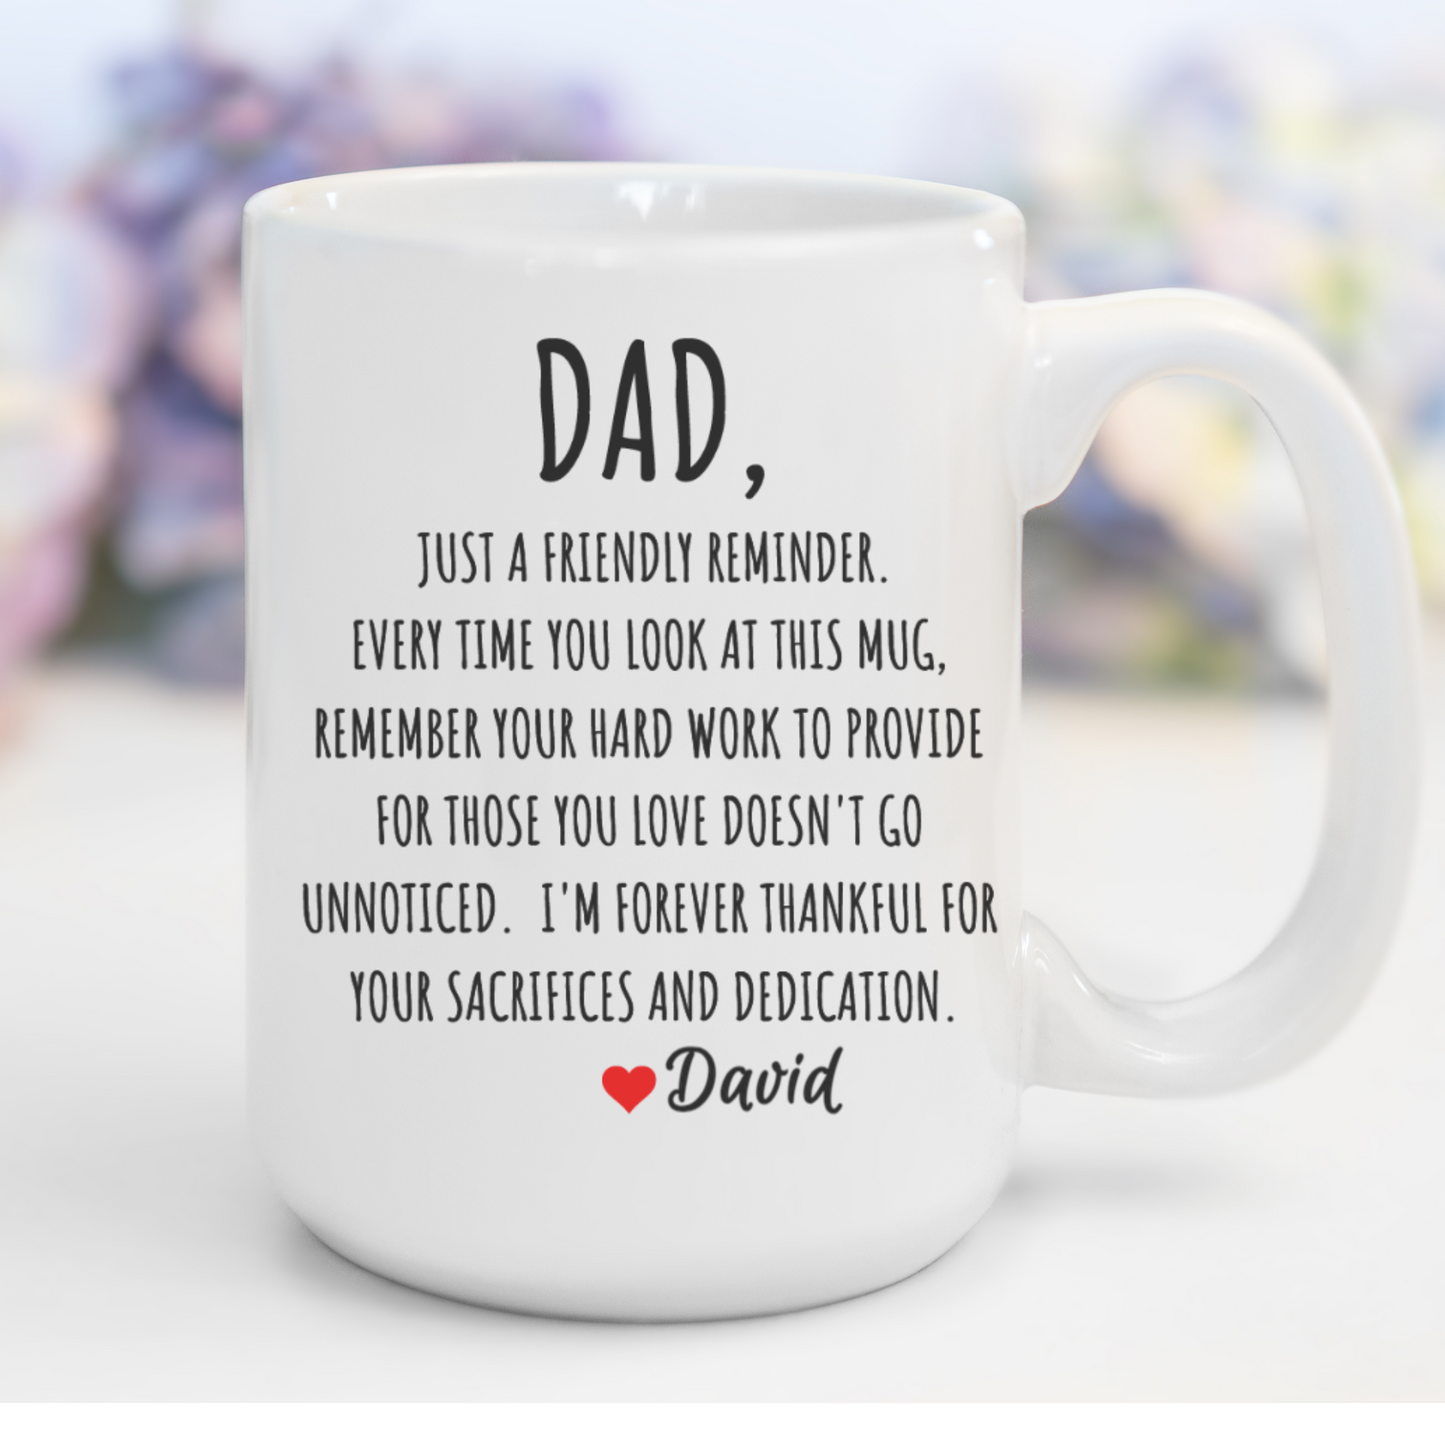 Personalize Dad's Just a Friendly Reminder Mug